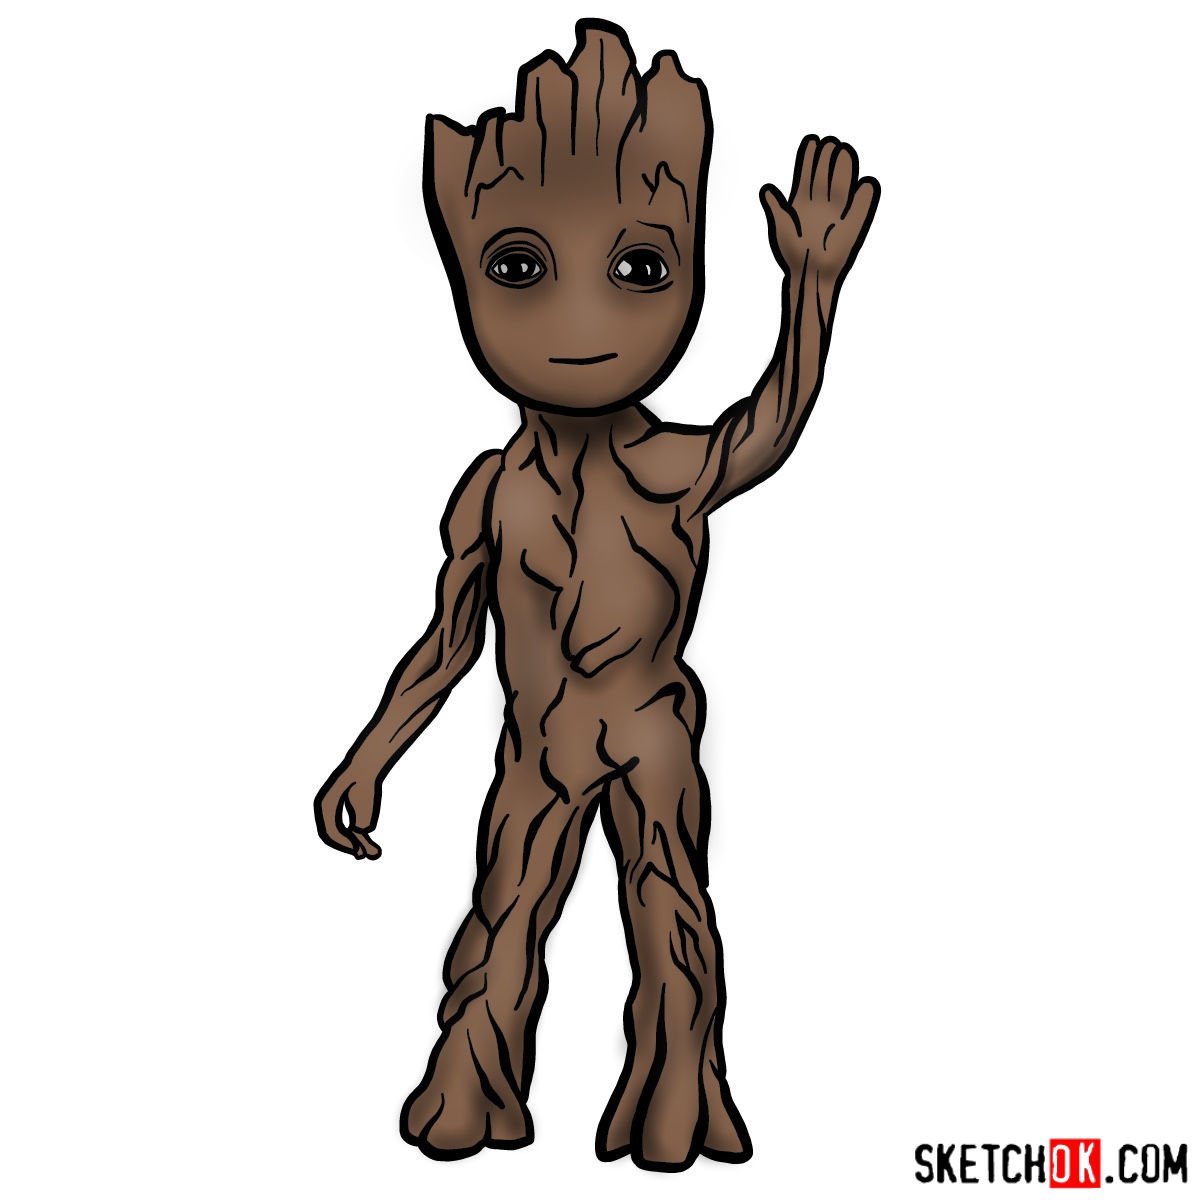 How to draw Baby Groot waving - Sketchok easy drawing guides